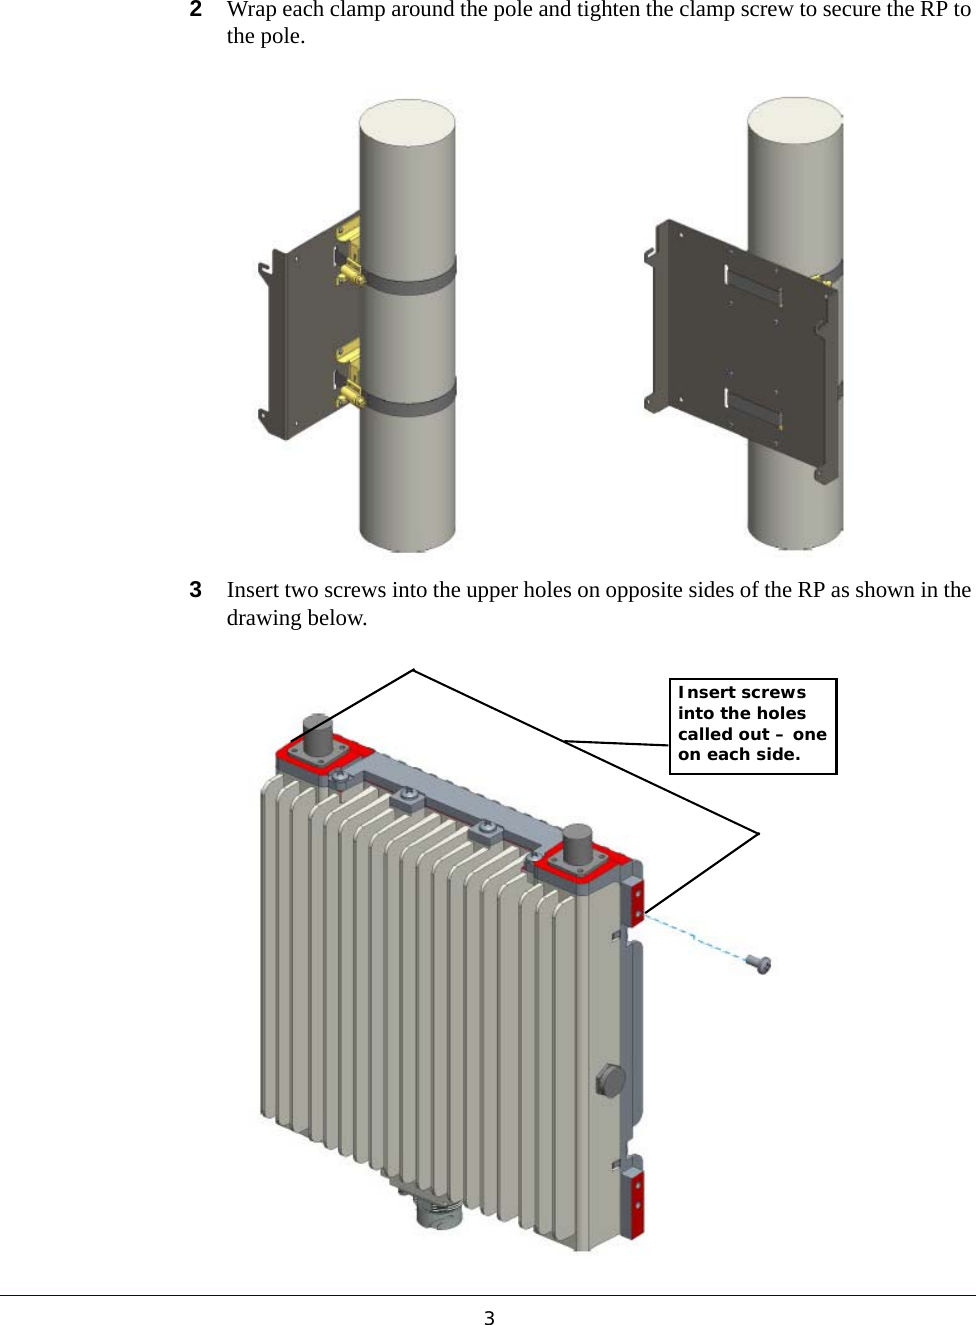 32Wrap each clamp around the pole and tighten the clamp screw to secure the RP to the pole. 3Insert two screws into the upper holes on opposite sides of the RP as shown in the drawing below. Insert screws into the holes called out – one on each side. 